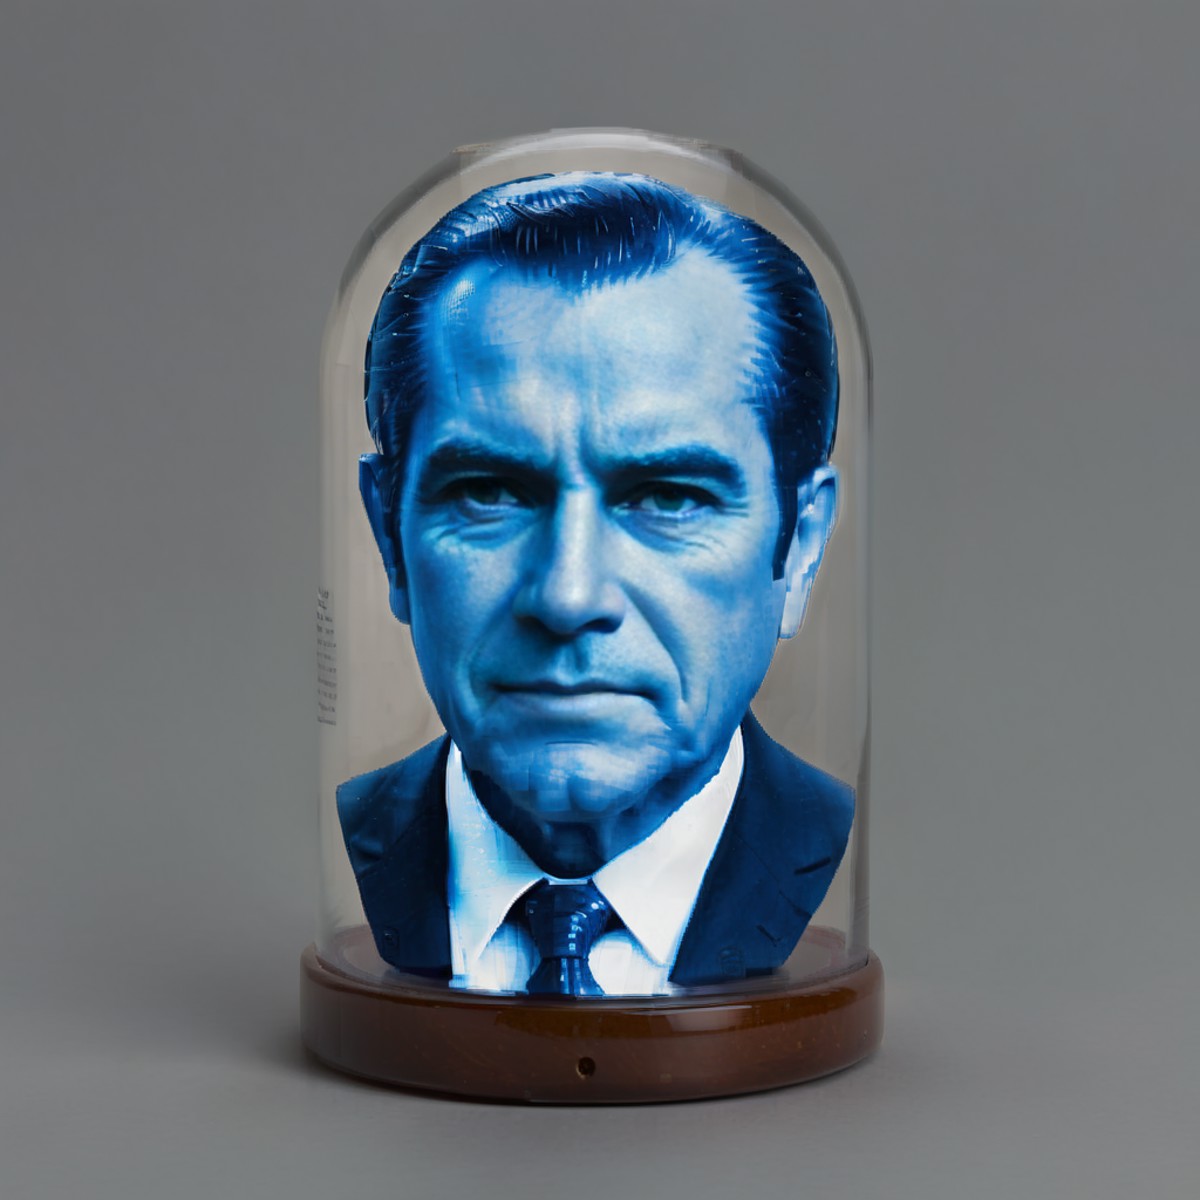 For a realistic style image of President Nixon's full-sized head encased in a transparent glass container: 'A hyper-realis...